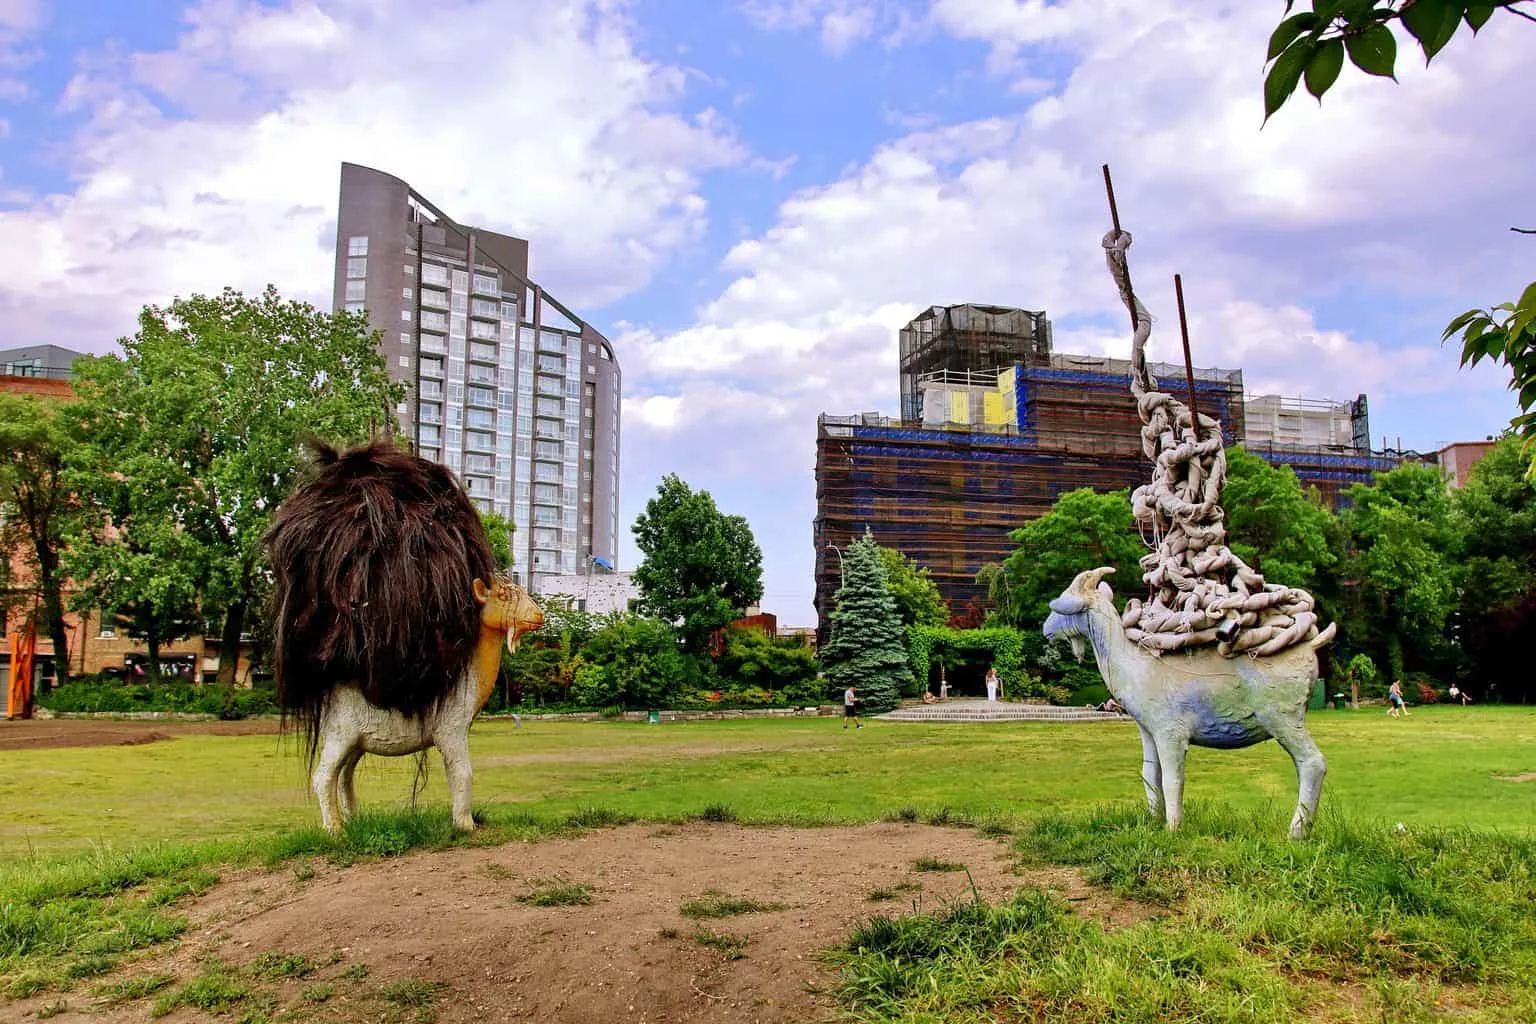 A quirky depiction of goats in Socrates Sculpture Par amongst others  is one of the unusual things to do in NYC.